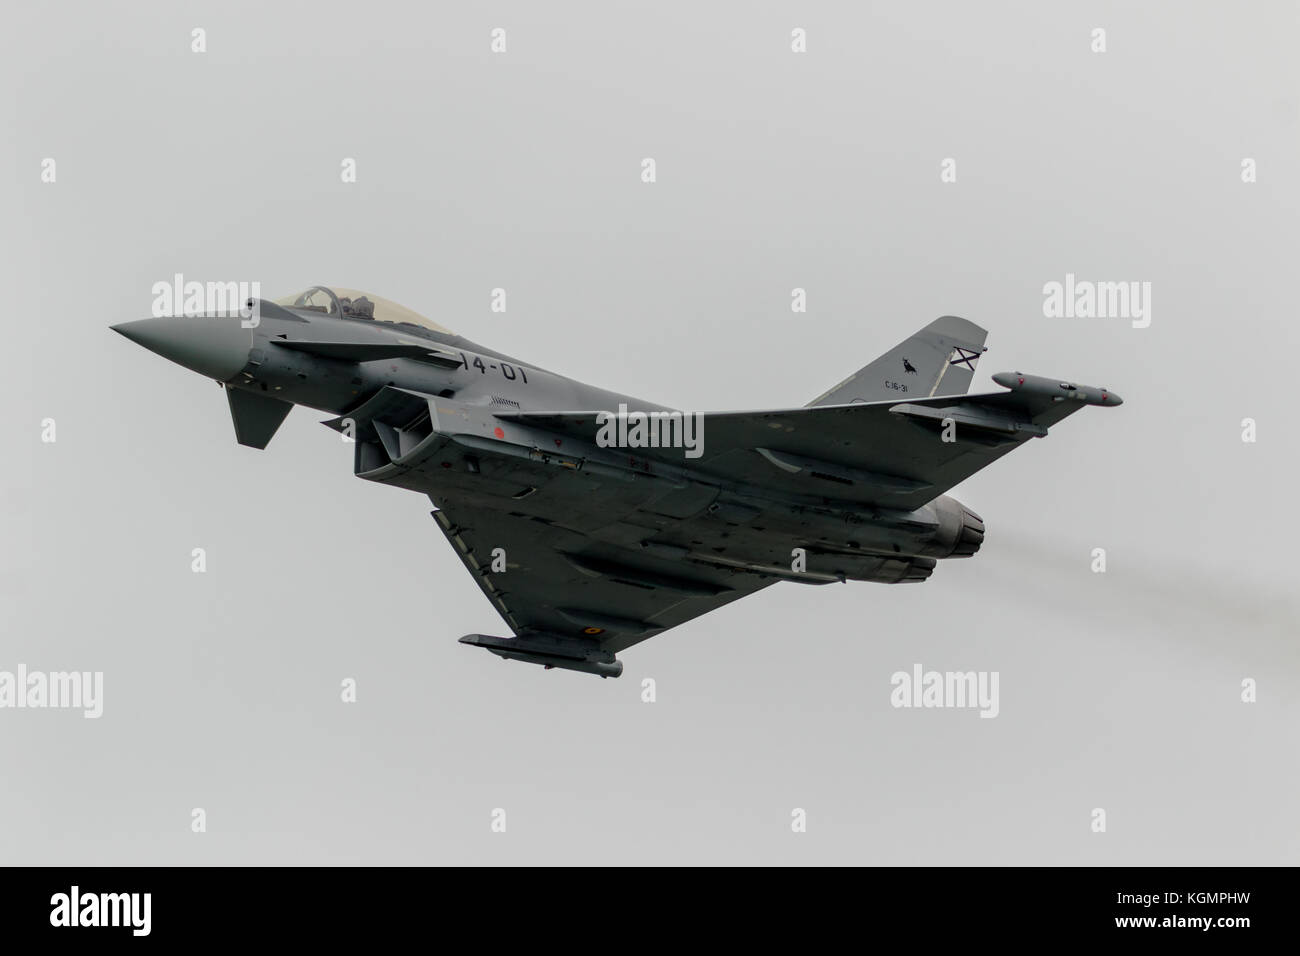 MOTRIL, GRANADA, SPAIN-JUN 10: Aircraft Eurofighter Typhoon C-16 taking part in a exhibition on the 12th international  airshow of Motril on June 10,  Stock Photo